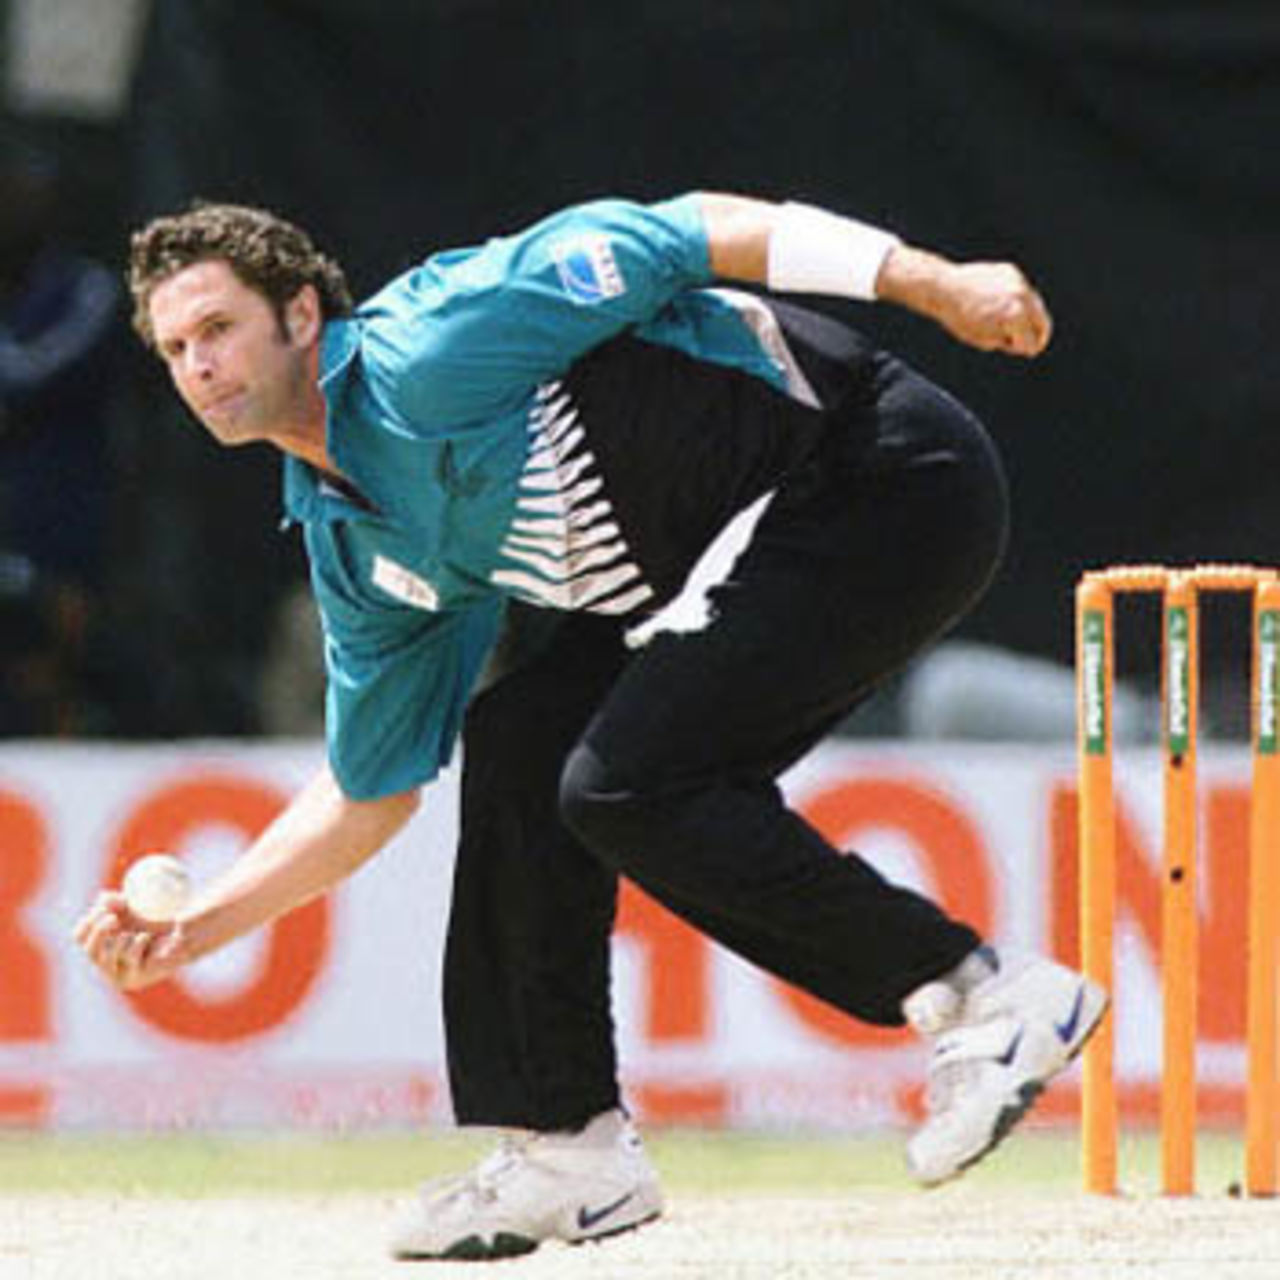 Chris Cairns stops the ball on his follow through, ICC KnockOut, 2000/01, Final, India v New Zealand, Gymkhana Club Ground, Nairobi, 15 October 2000.